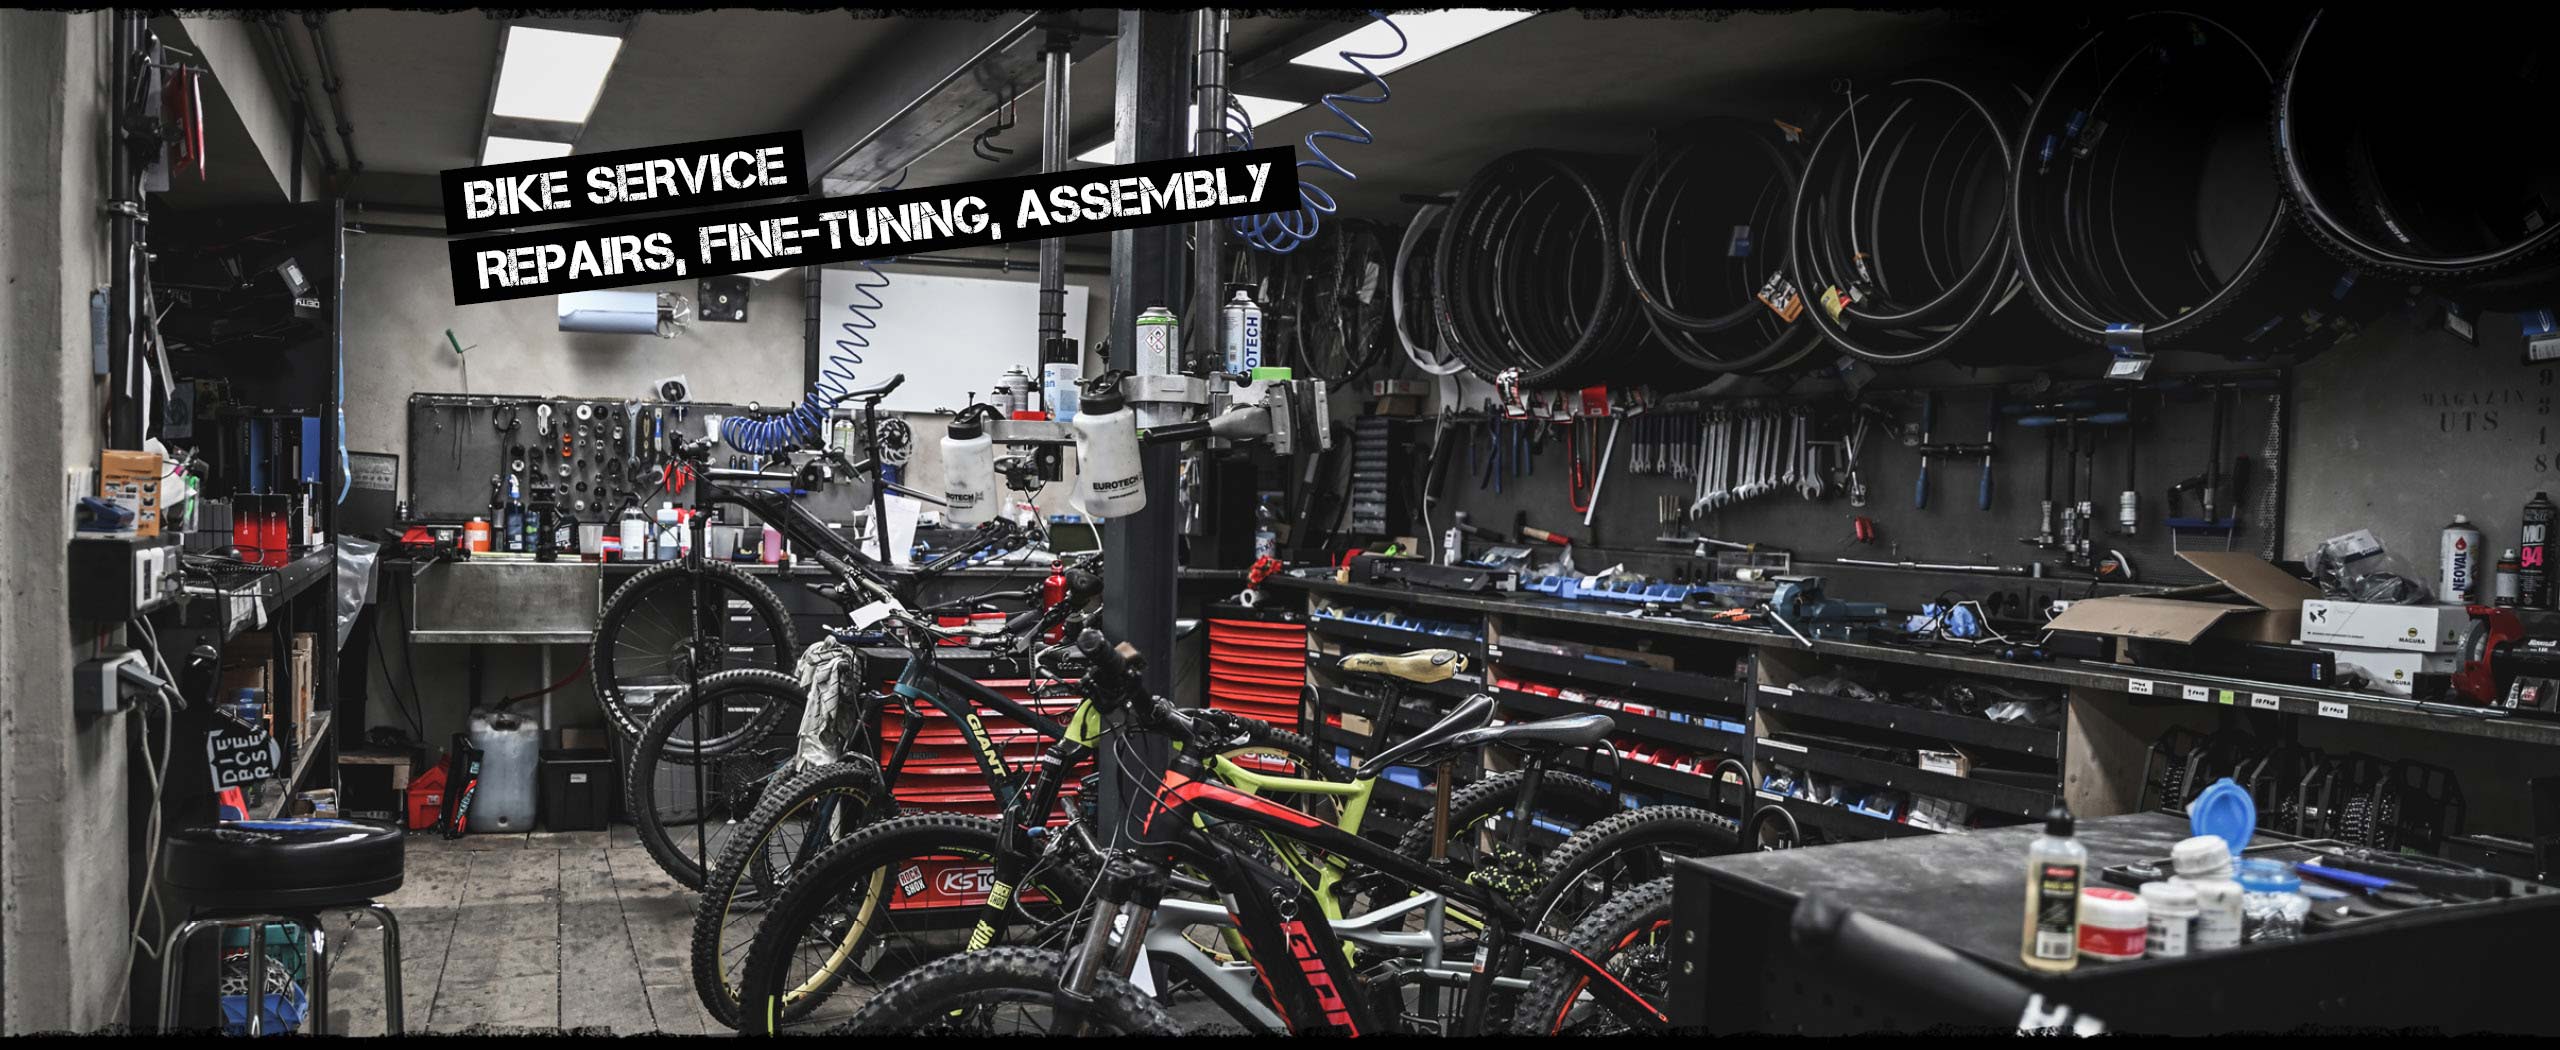 Bike service Repairs fine-tuning assembly